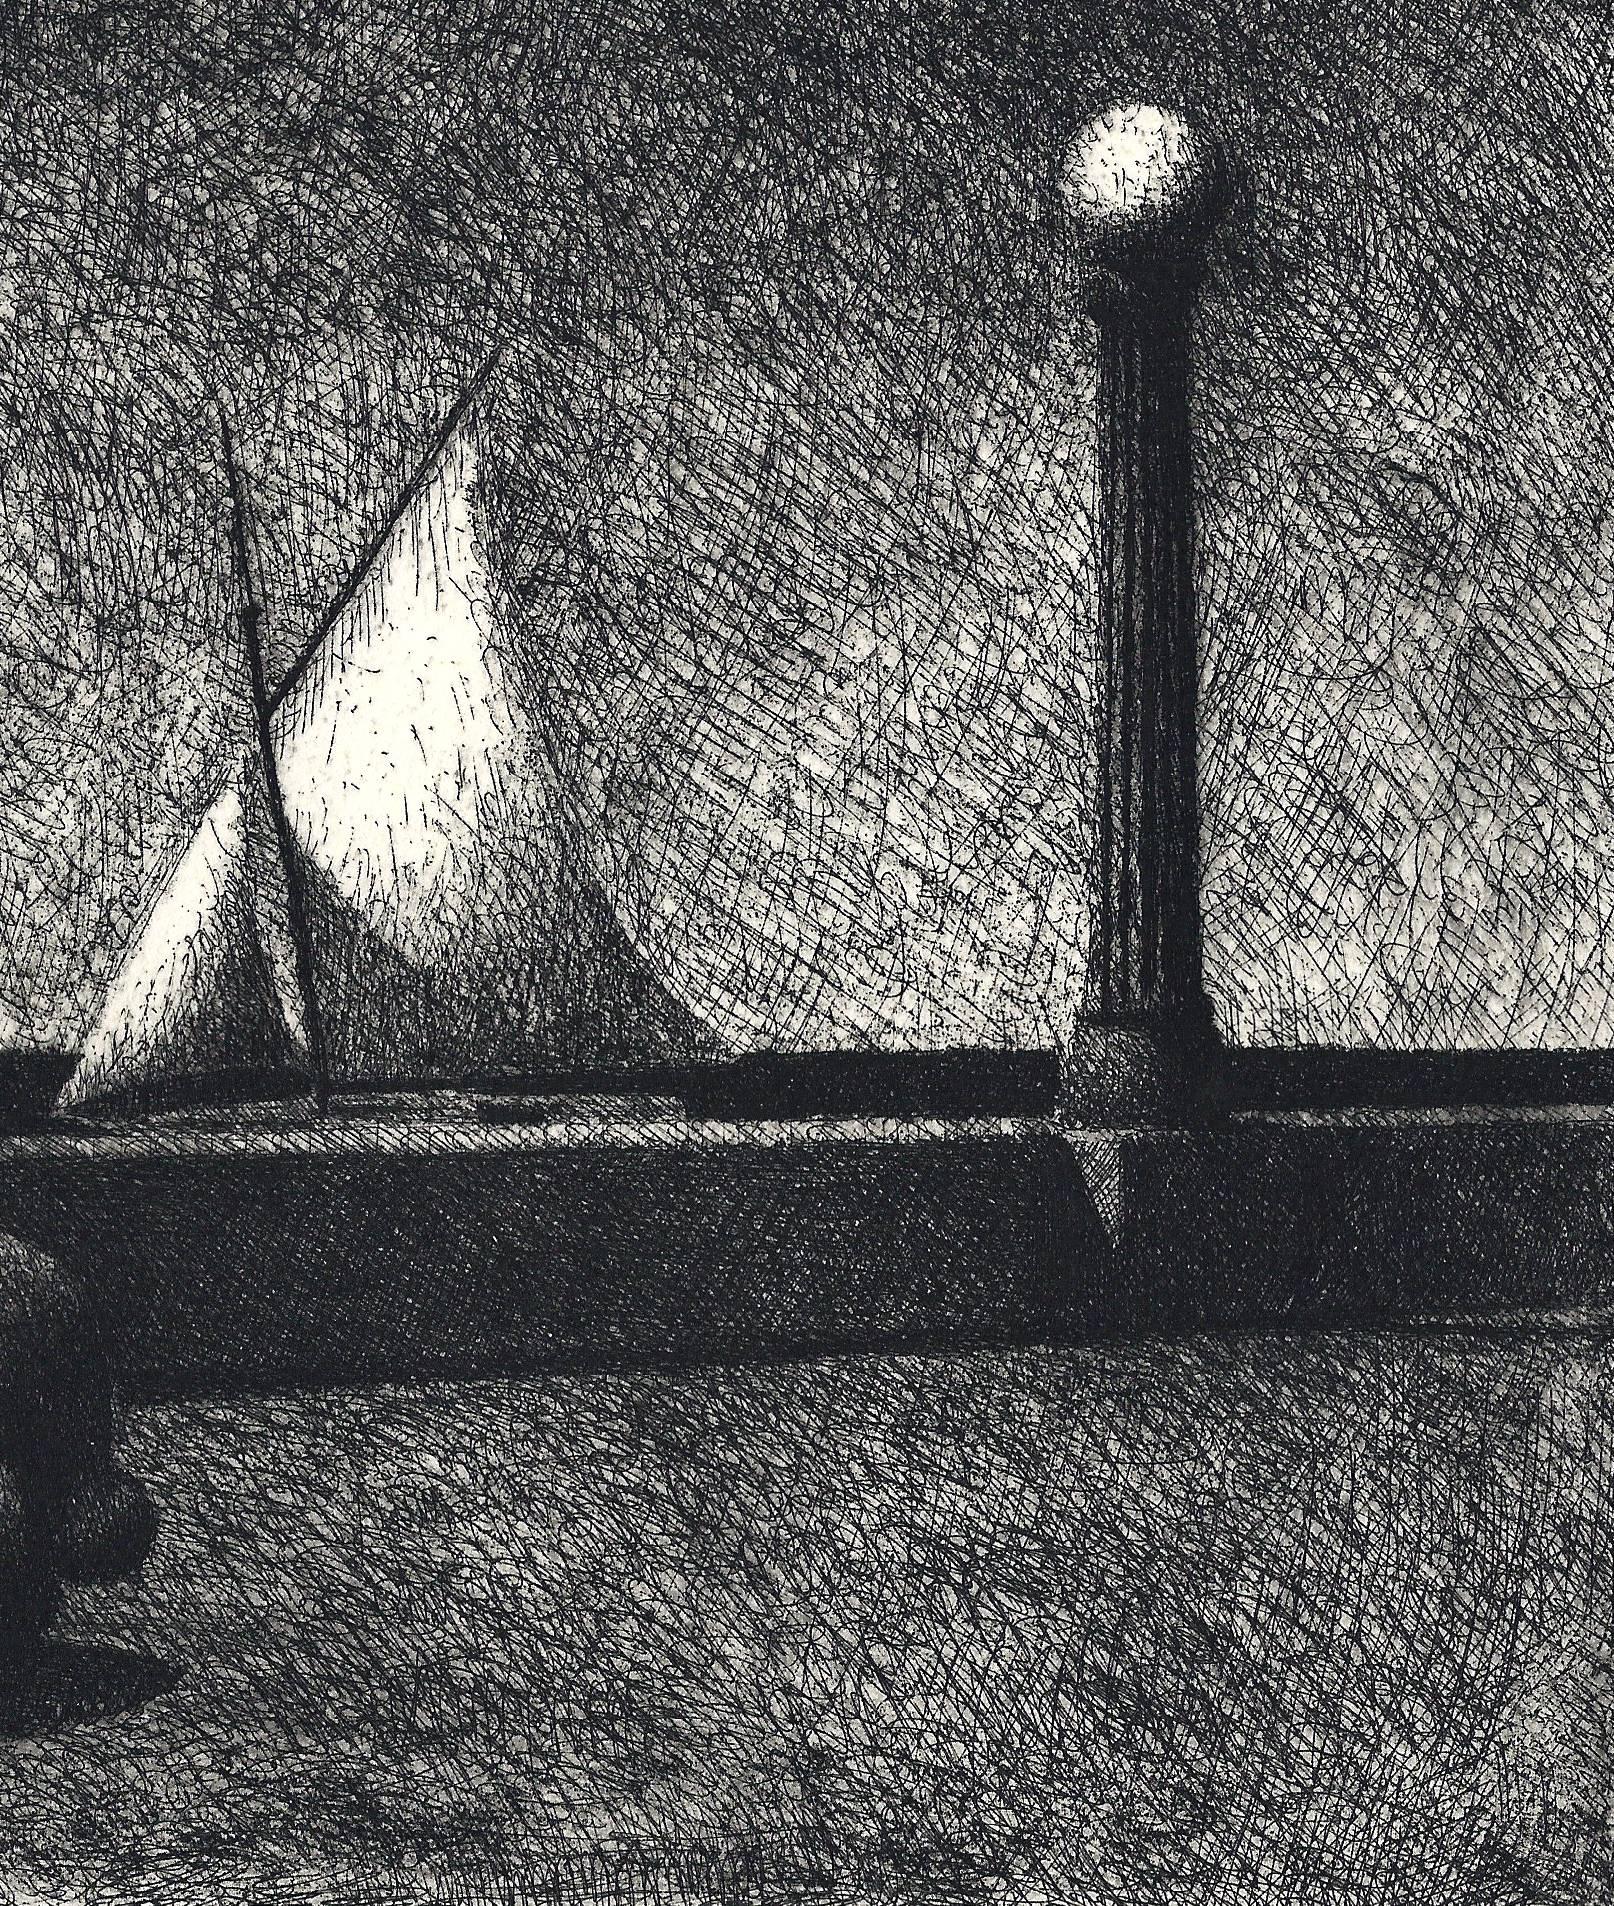 Difficult Crossing, limited edition etching  - American Modern Print by Michael Chapman